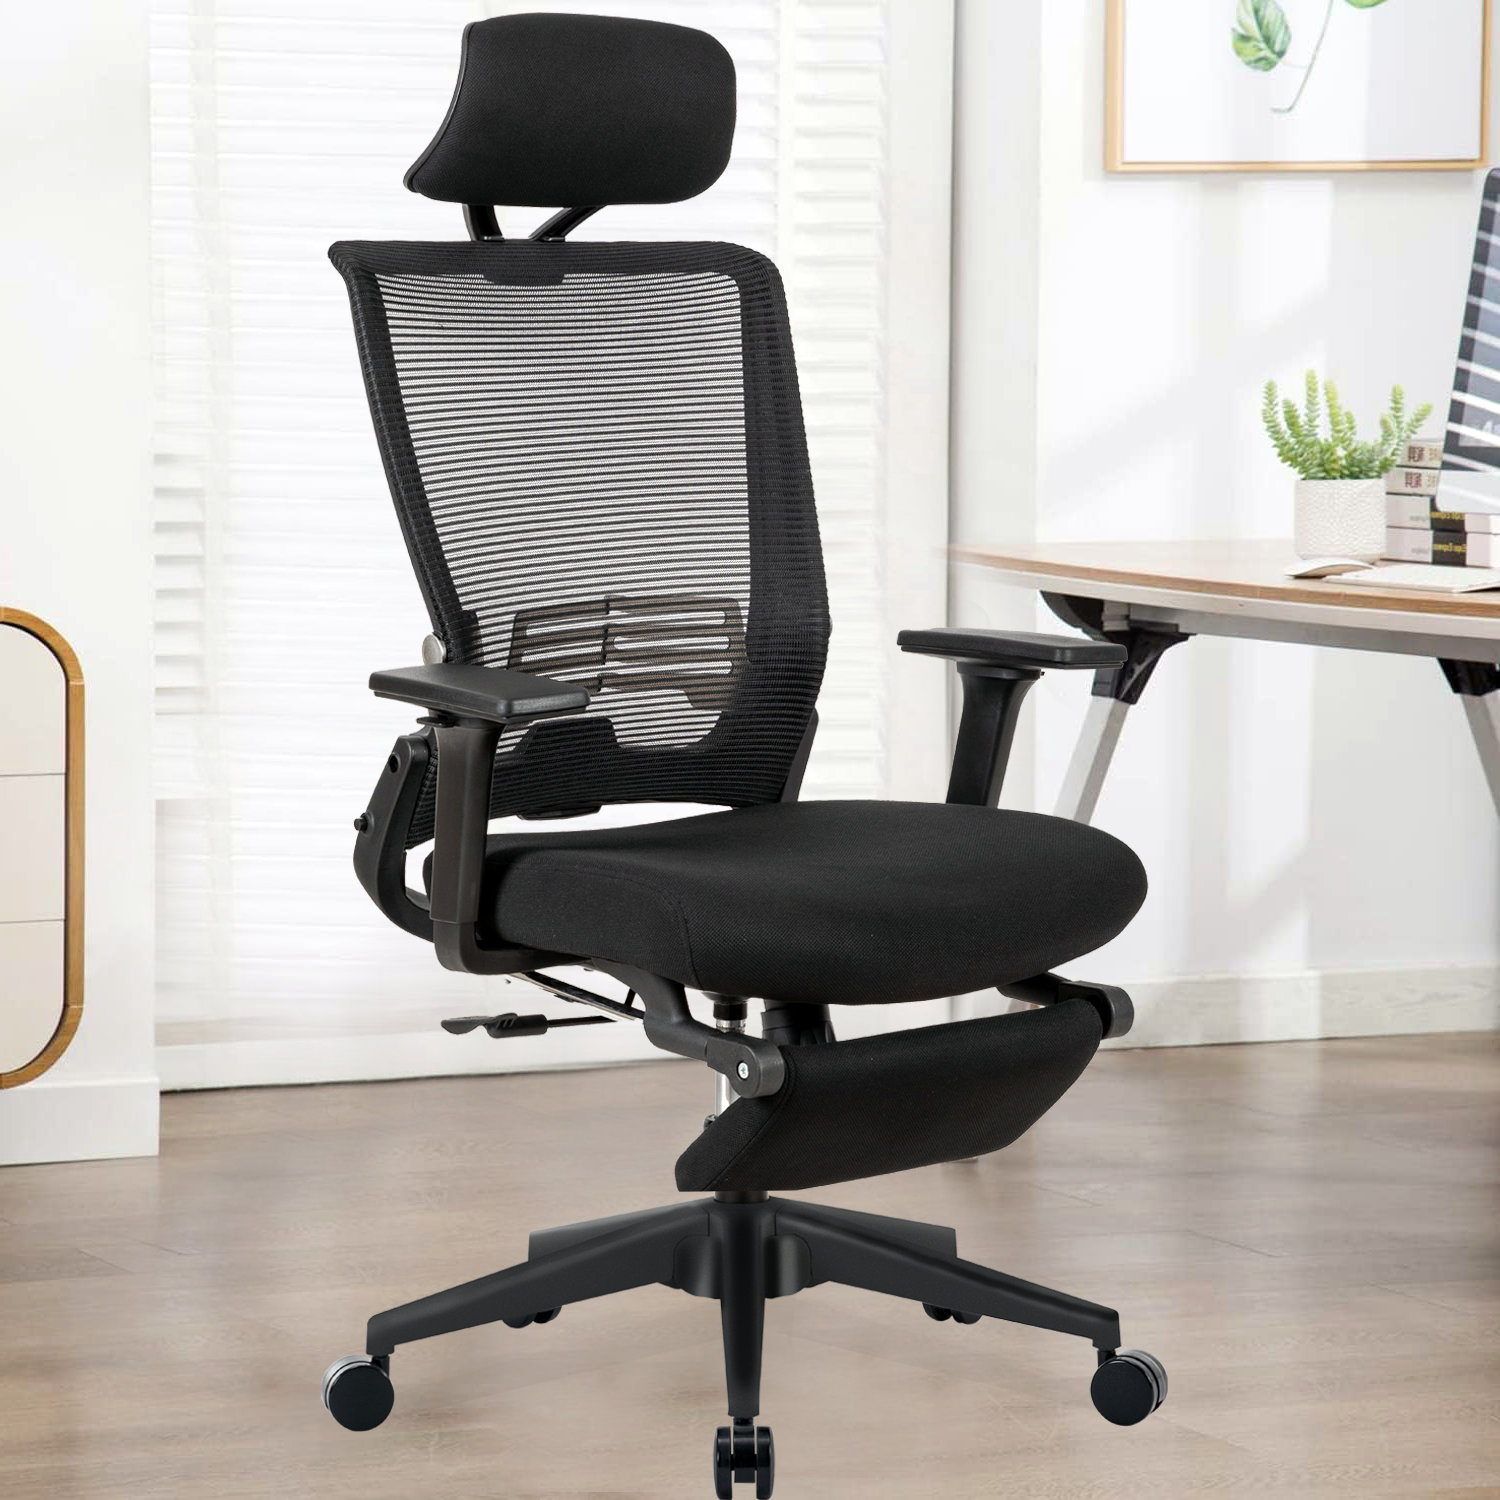 Ergonomic Task Chair, Mesh Office Seat with Lumbar Support Backrest & Flip-Up Arms Bring Home Furniture Upholstery Color: Gray